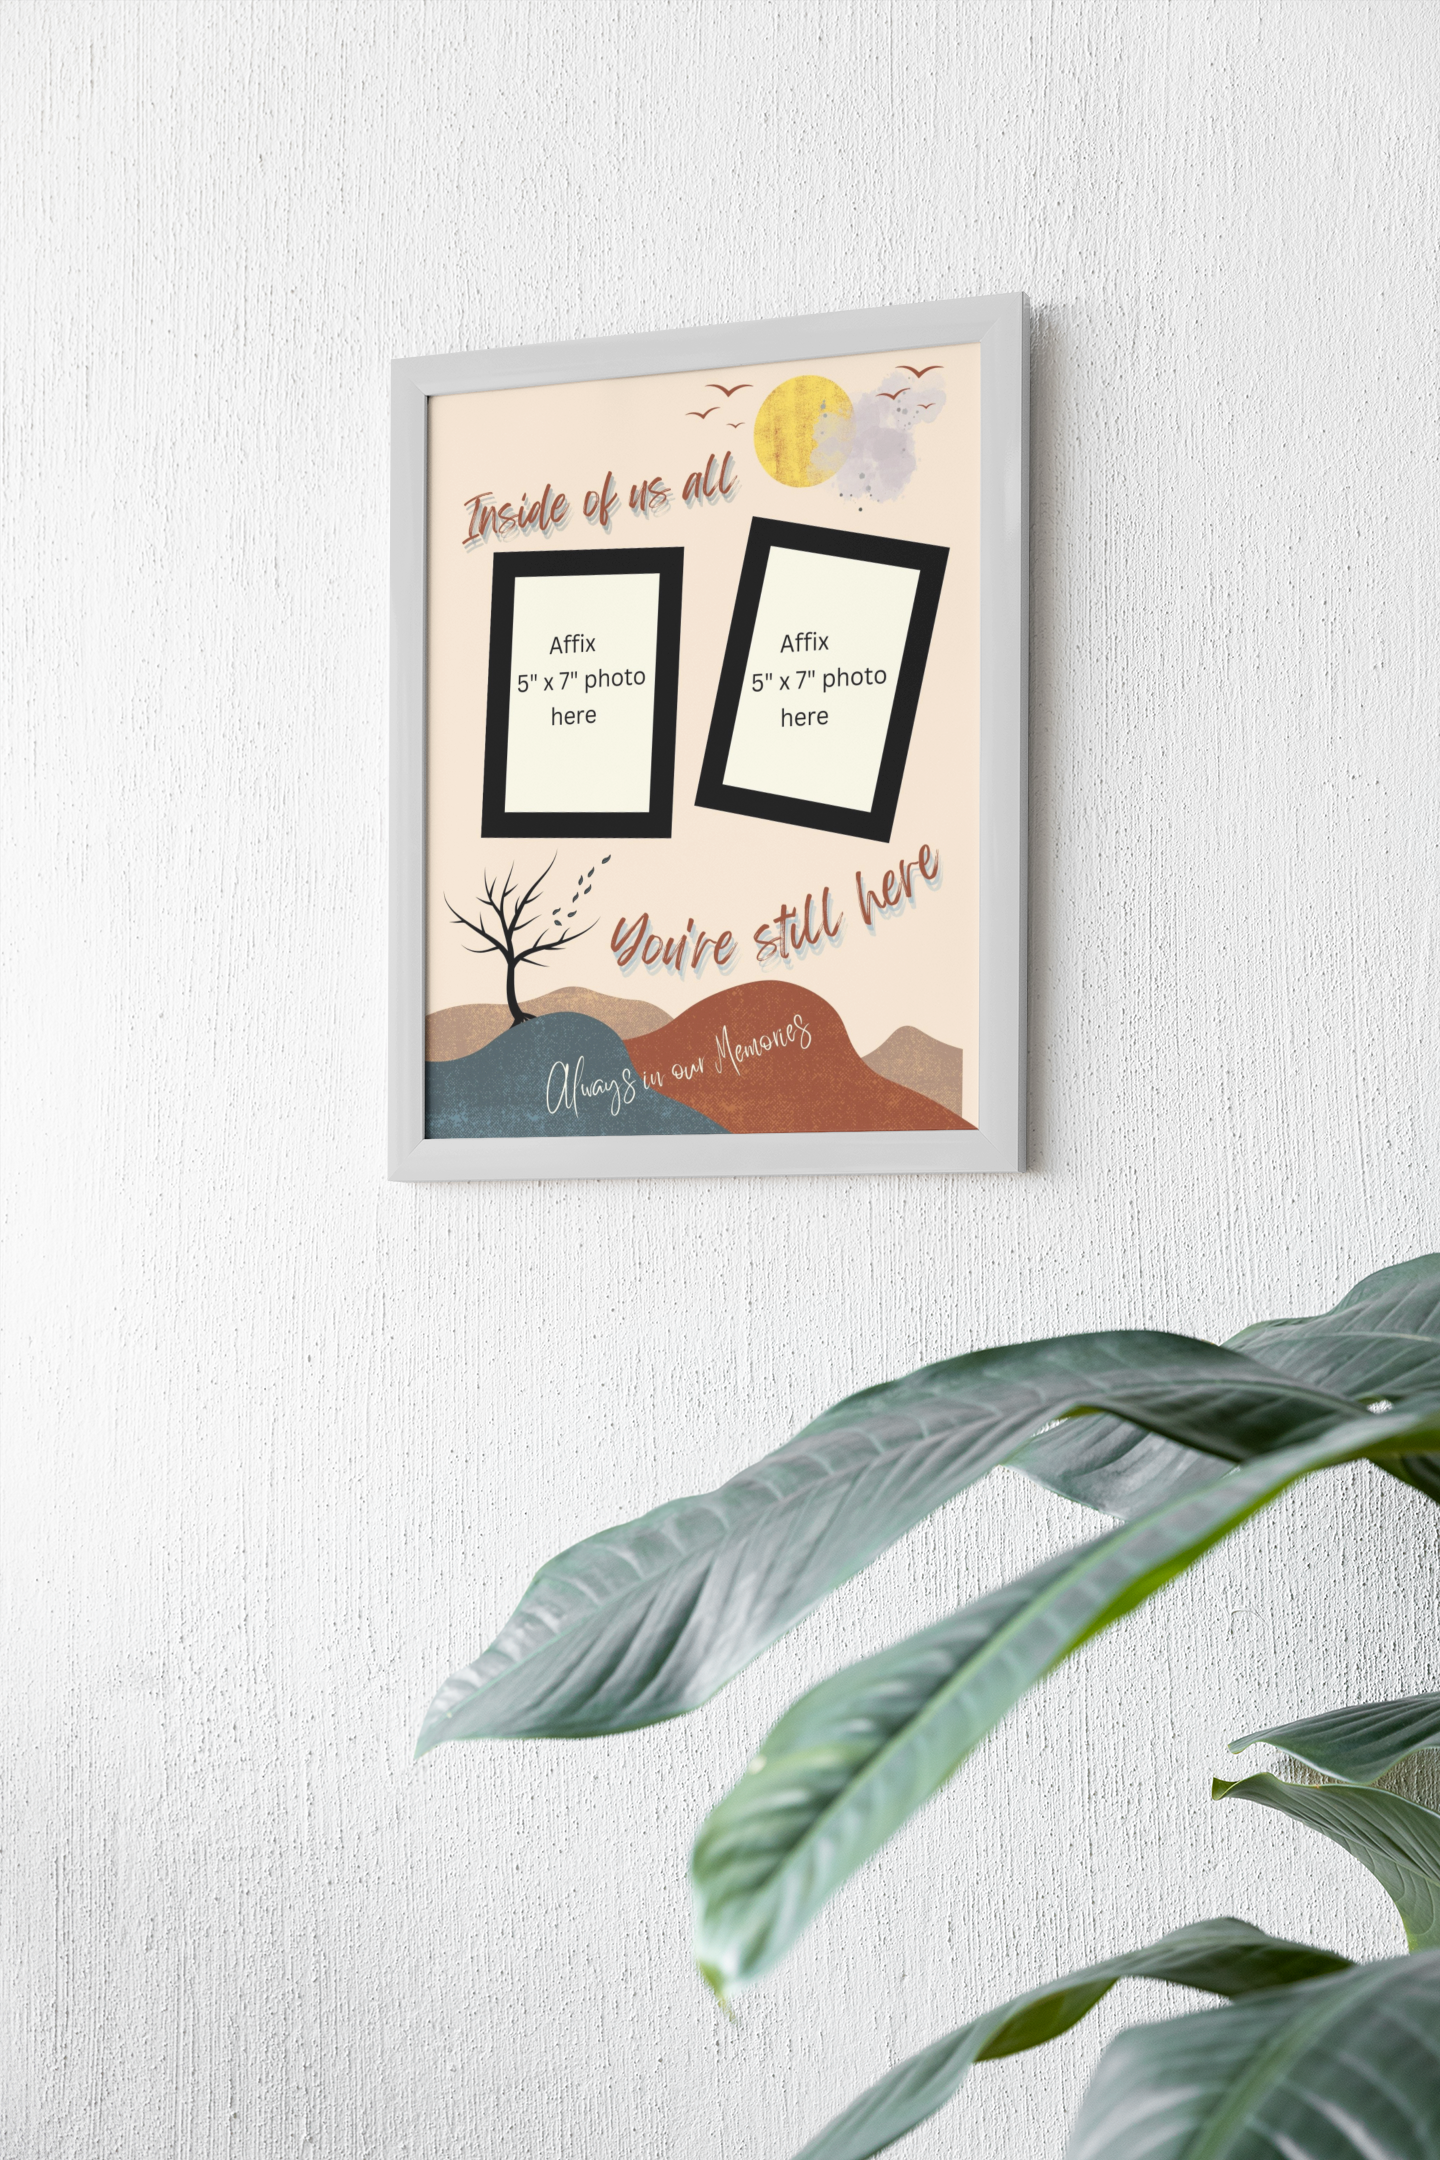 MEMORY of a LOVED ONE - QUIRKY UNIQUE WALL ART with a NATURE theme, featuring heartfelt words of love to remember them always.